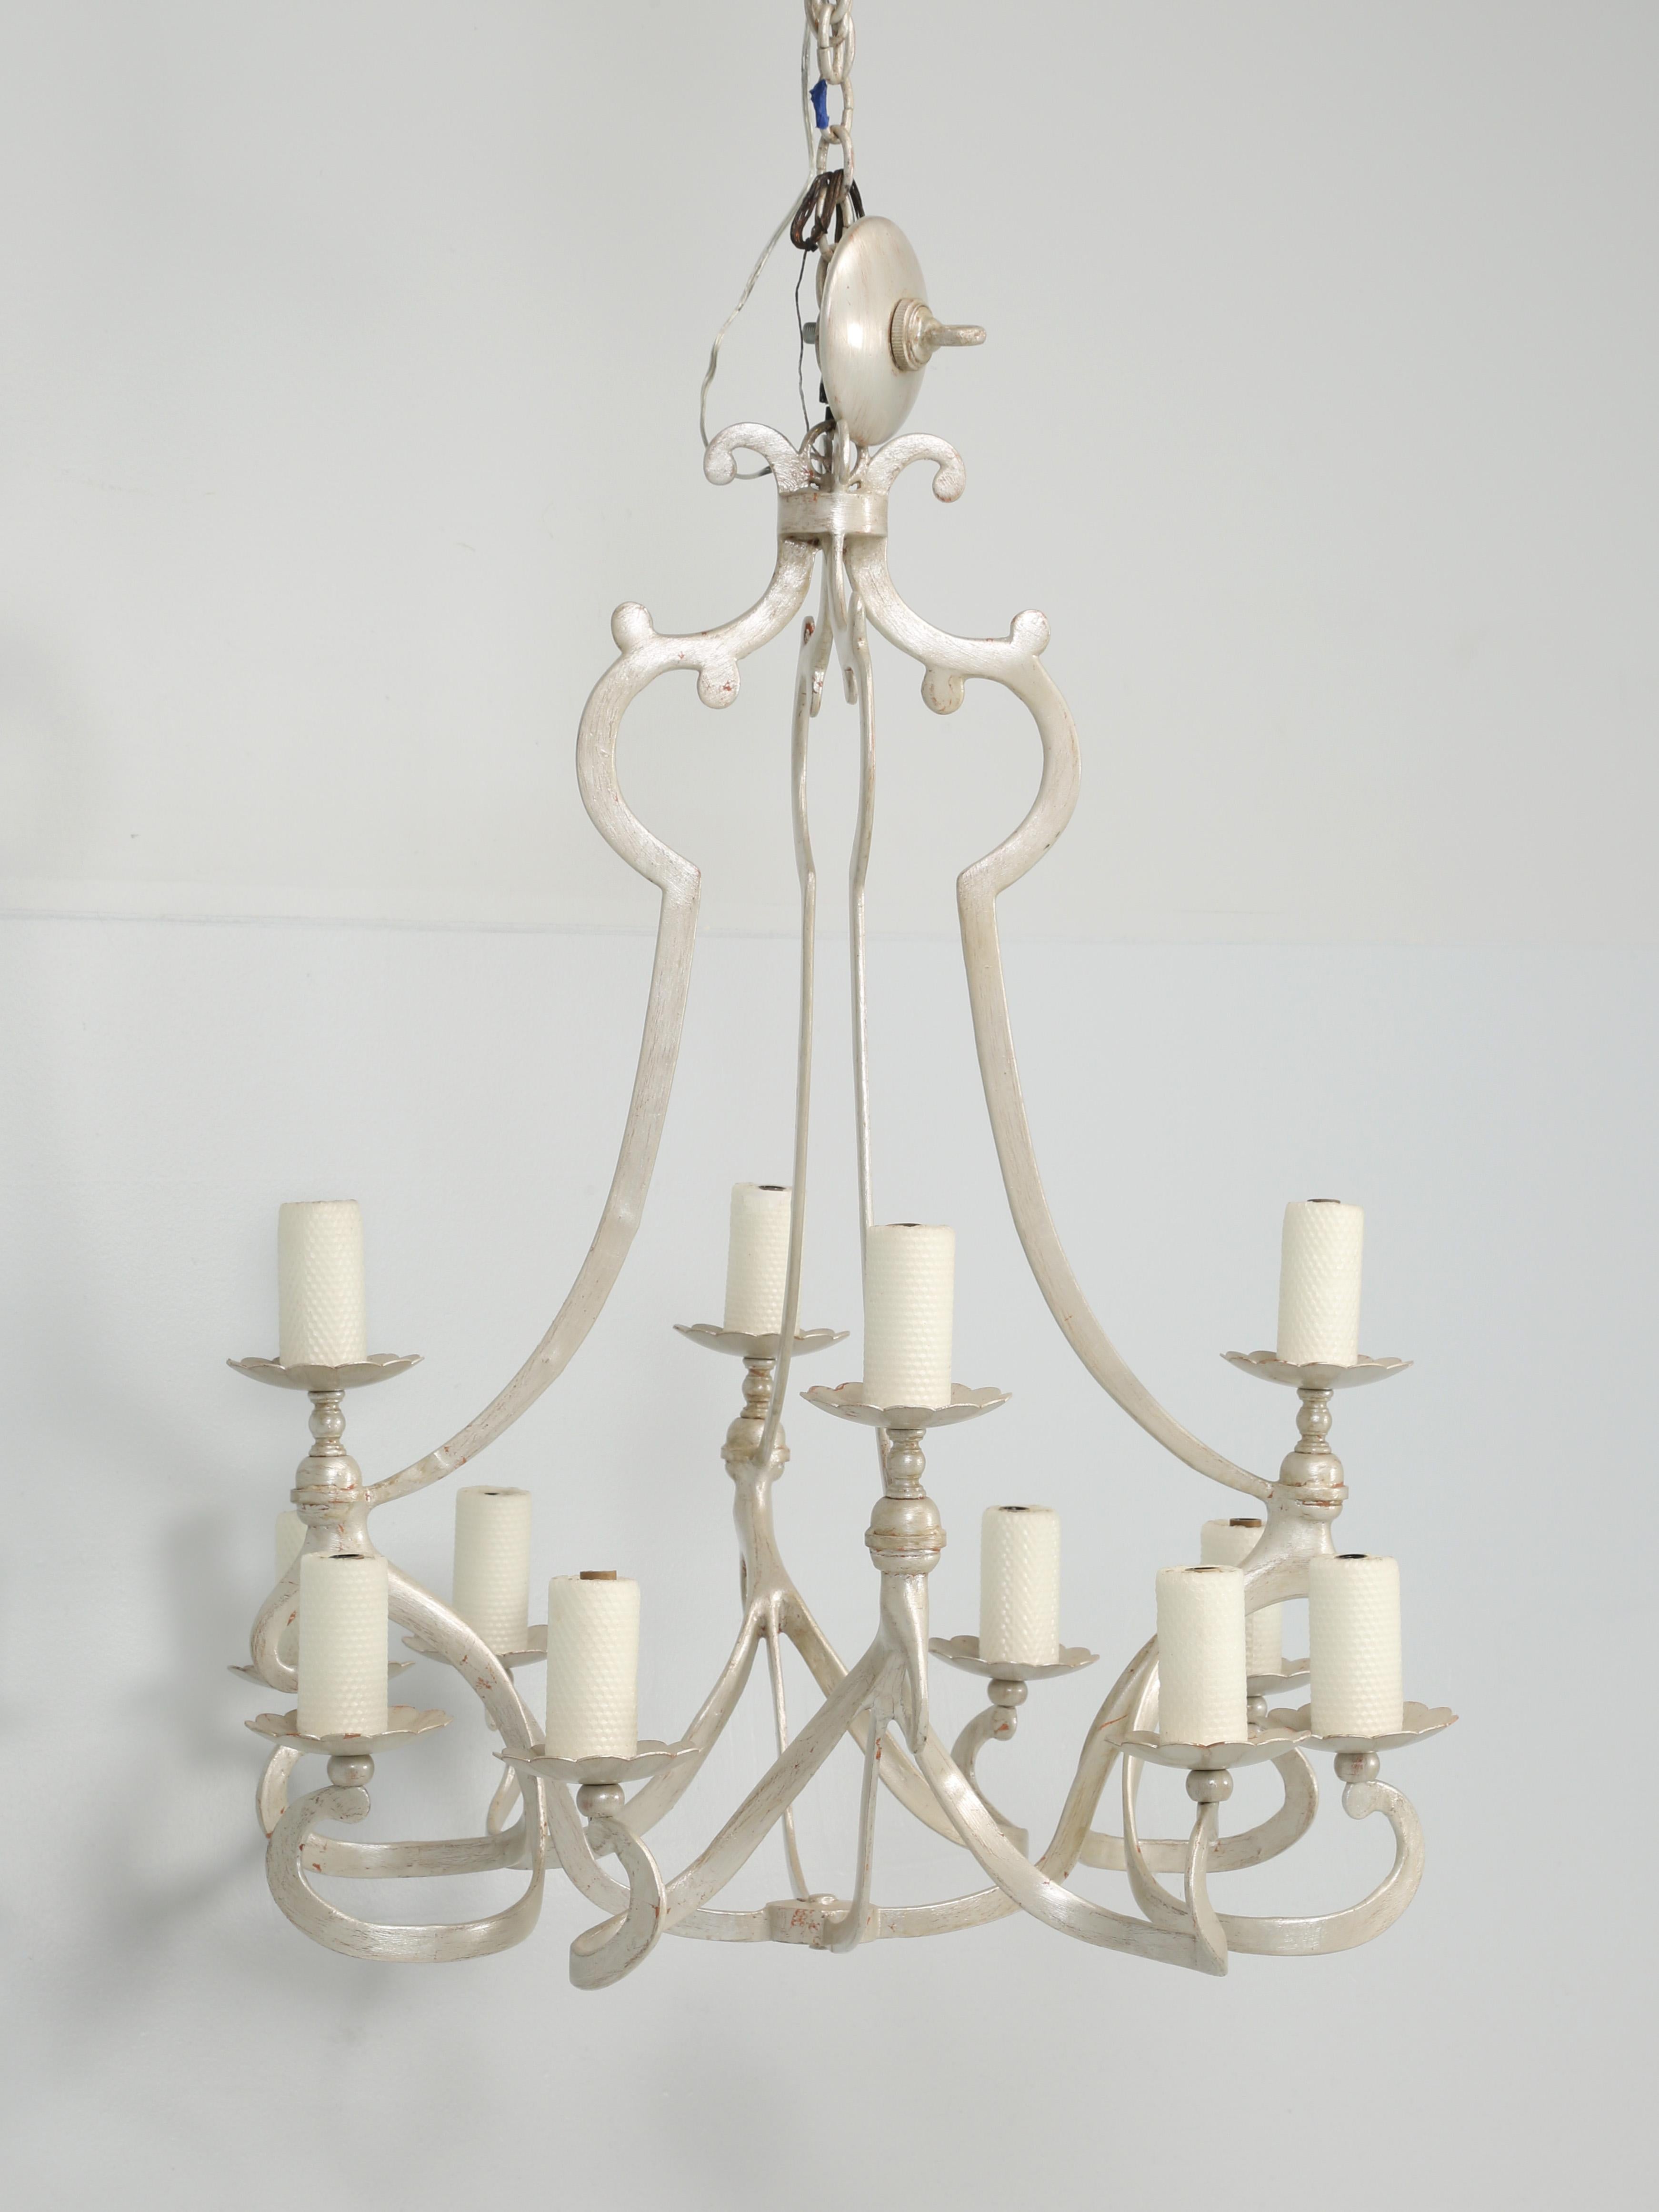 This chandelier was made by the Niermann Weeks Company and is called their crevecoeur chandelier finished in their Veronese Silver silver leaf. The Niermann Weeks website states that it is their interruption of an antique chandelier with many